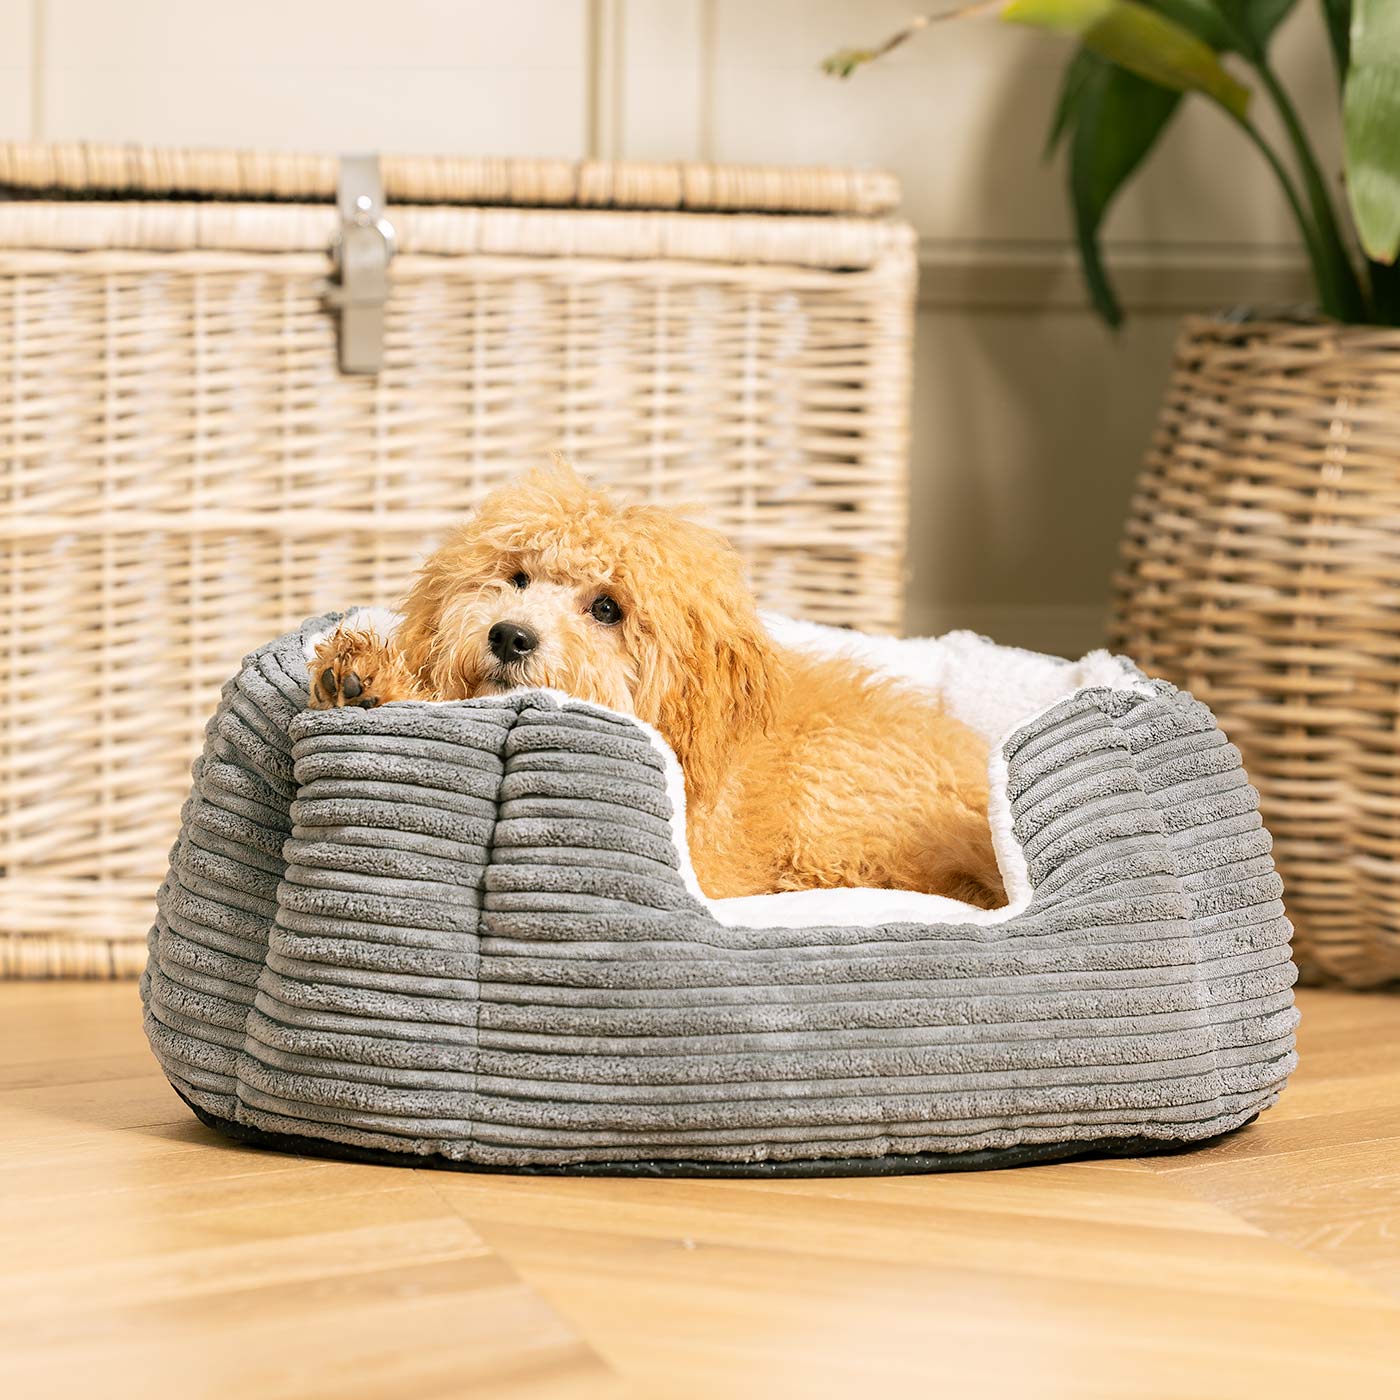 Discover Our Luxurious High Wall Bed For Dogs, Featuring inner pillow with plush teddy fleece on one side To Craft The Perfect Cat Bed In Stunning Essentials Dark Grey Plush! Available To Personalise Now at Lords & Labradors 